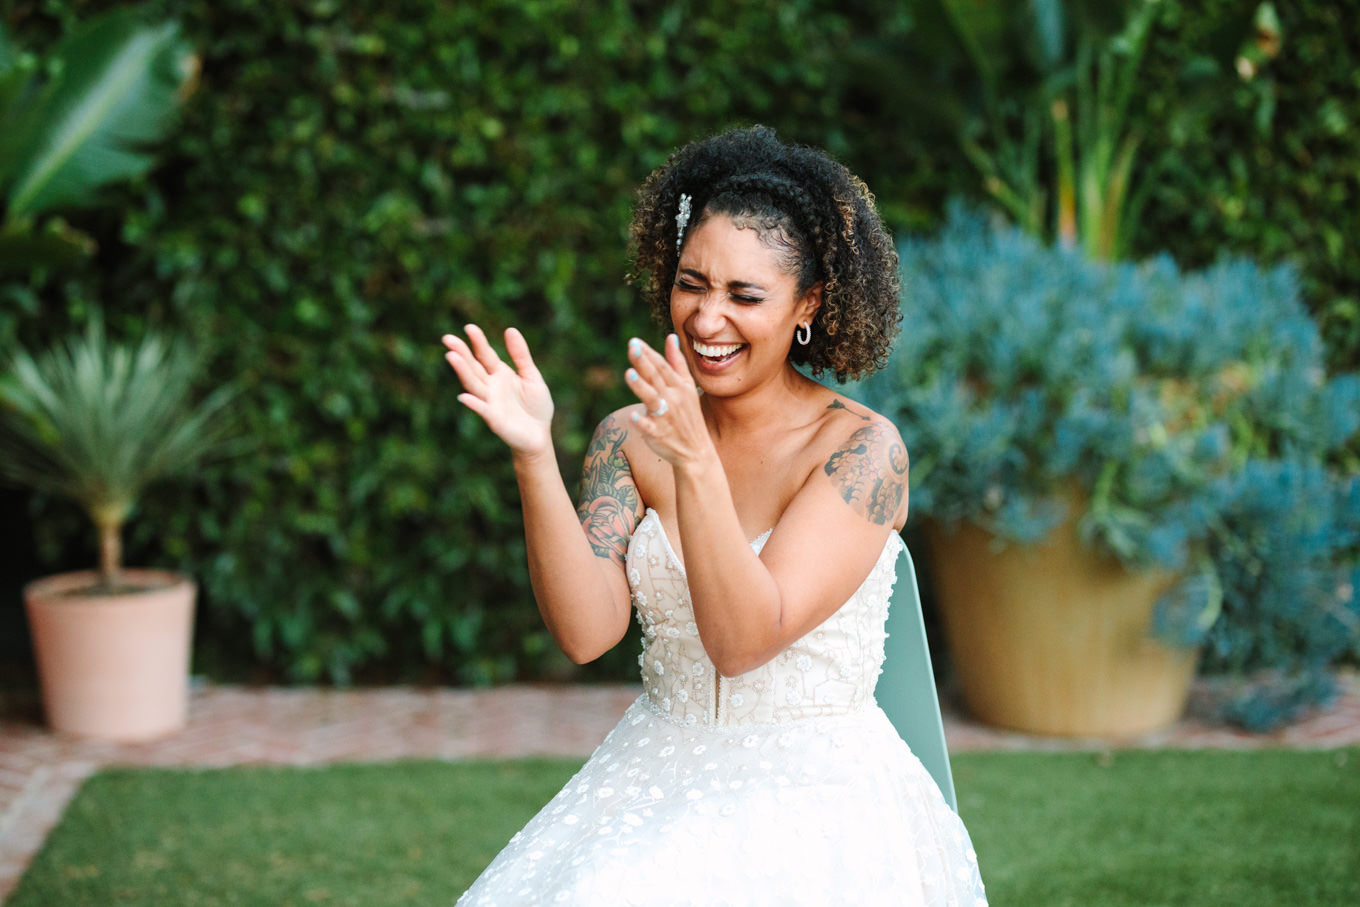 Bride clapping at groom's surprise song performance | Colorful pop-up micro wedding at The Ruby Street Los Angeles featured on Green Wedding Shoes | Colorful and elevated photography for fun-loving couples in Southern California | #colorfulwedding #popupwedding #weddingphotography #microwedding Source: Mary Costa Photography | Los Angeles